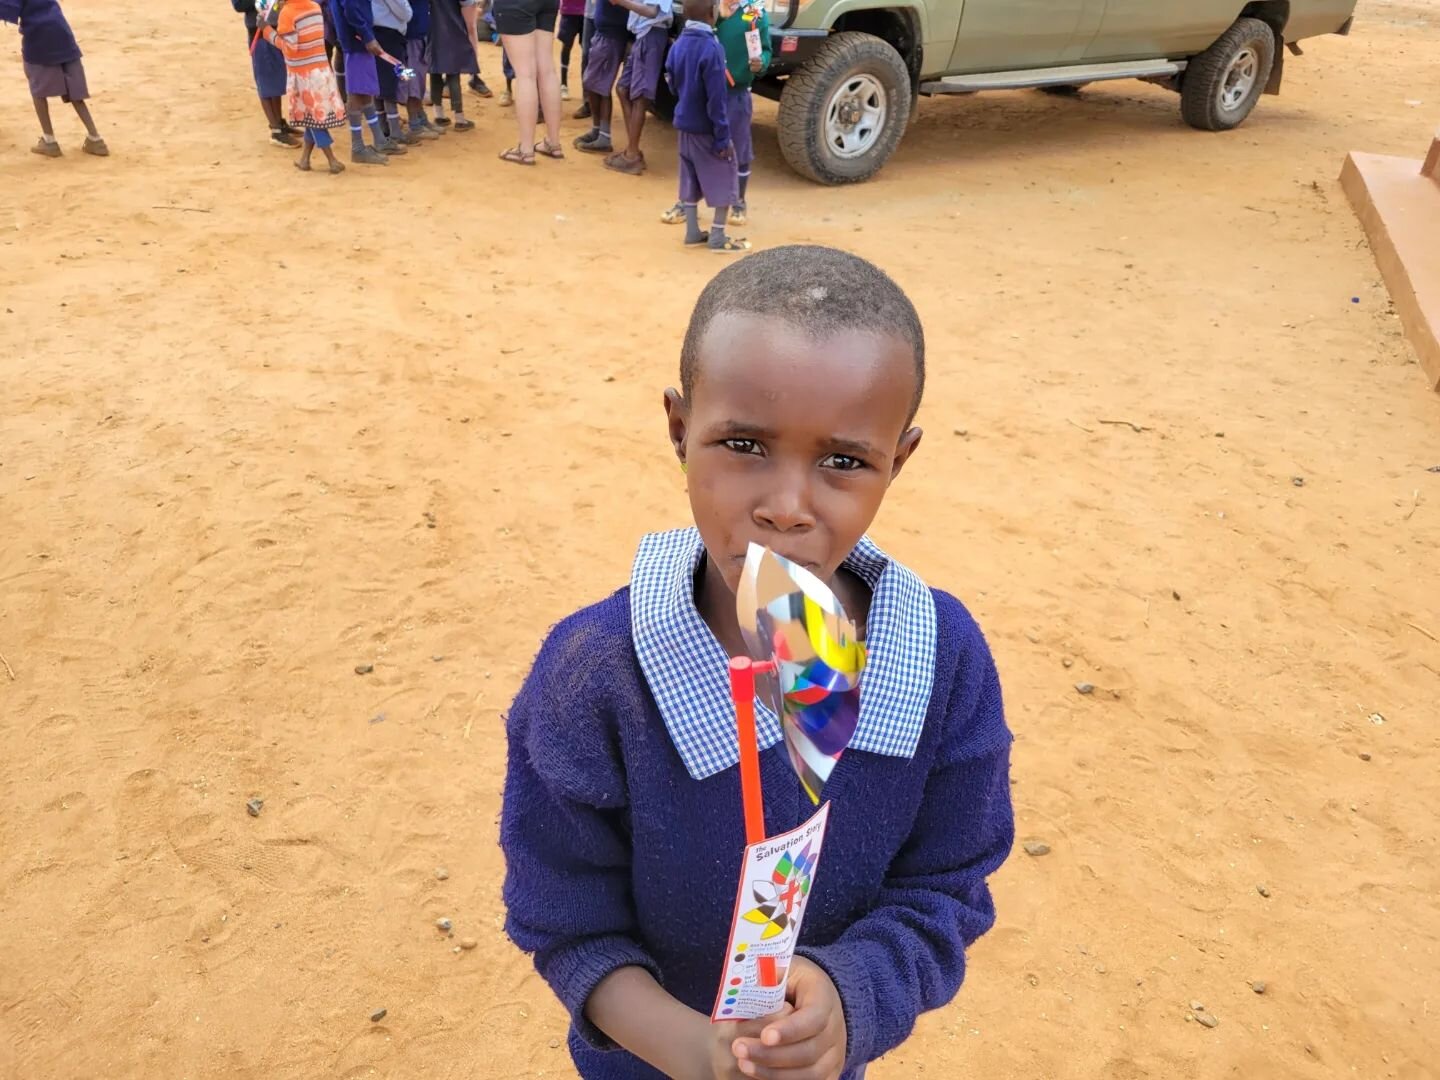 Stars of Heaven!
Each child enrolled in the Zion Baptist Church early education and development (ECD) school received a pinwheel to conclude the day's Bible program, Hero's of Faith.  It was a sight to see!